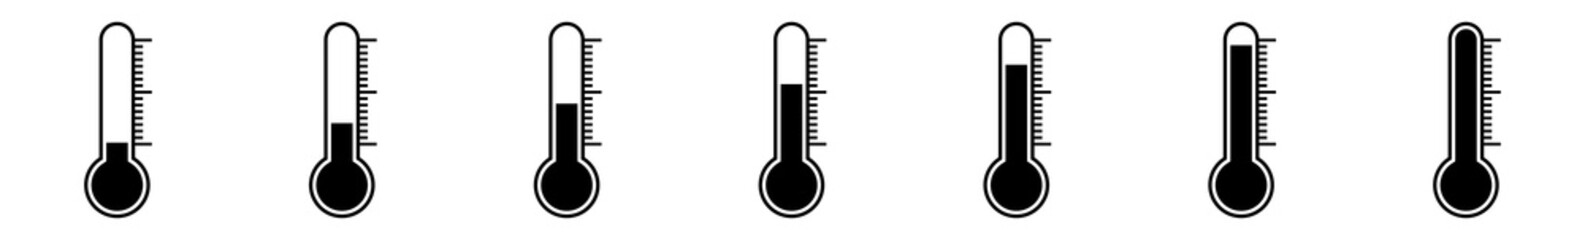 Thermometer Icon Black | Temperature Scale Symbol | Instrument Logo | Warm Cold Illustration | Weather Sign | Isolated | Variations